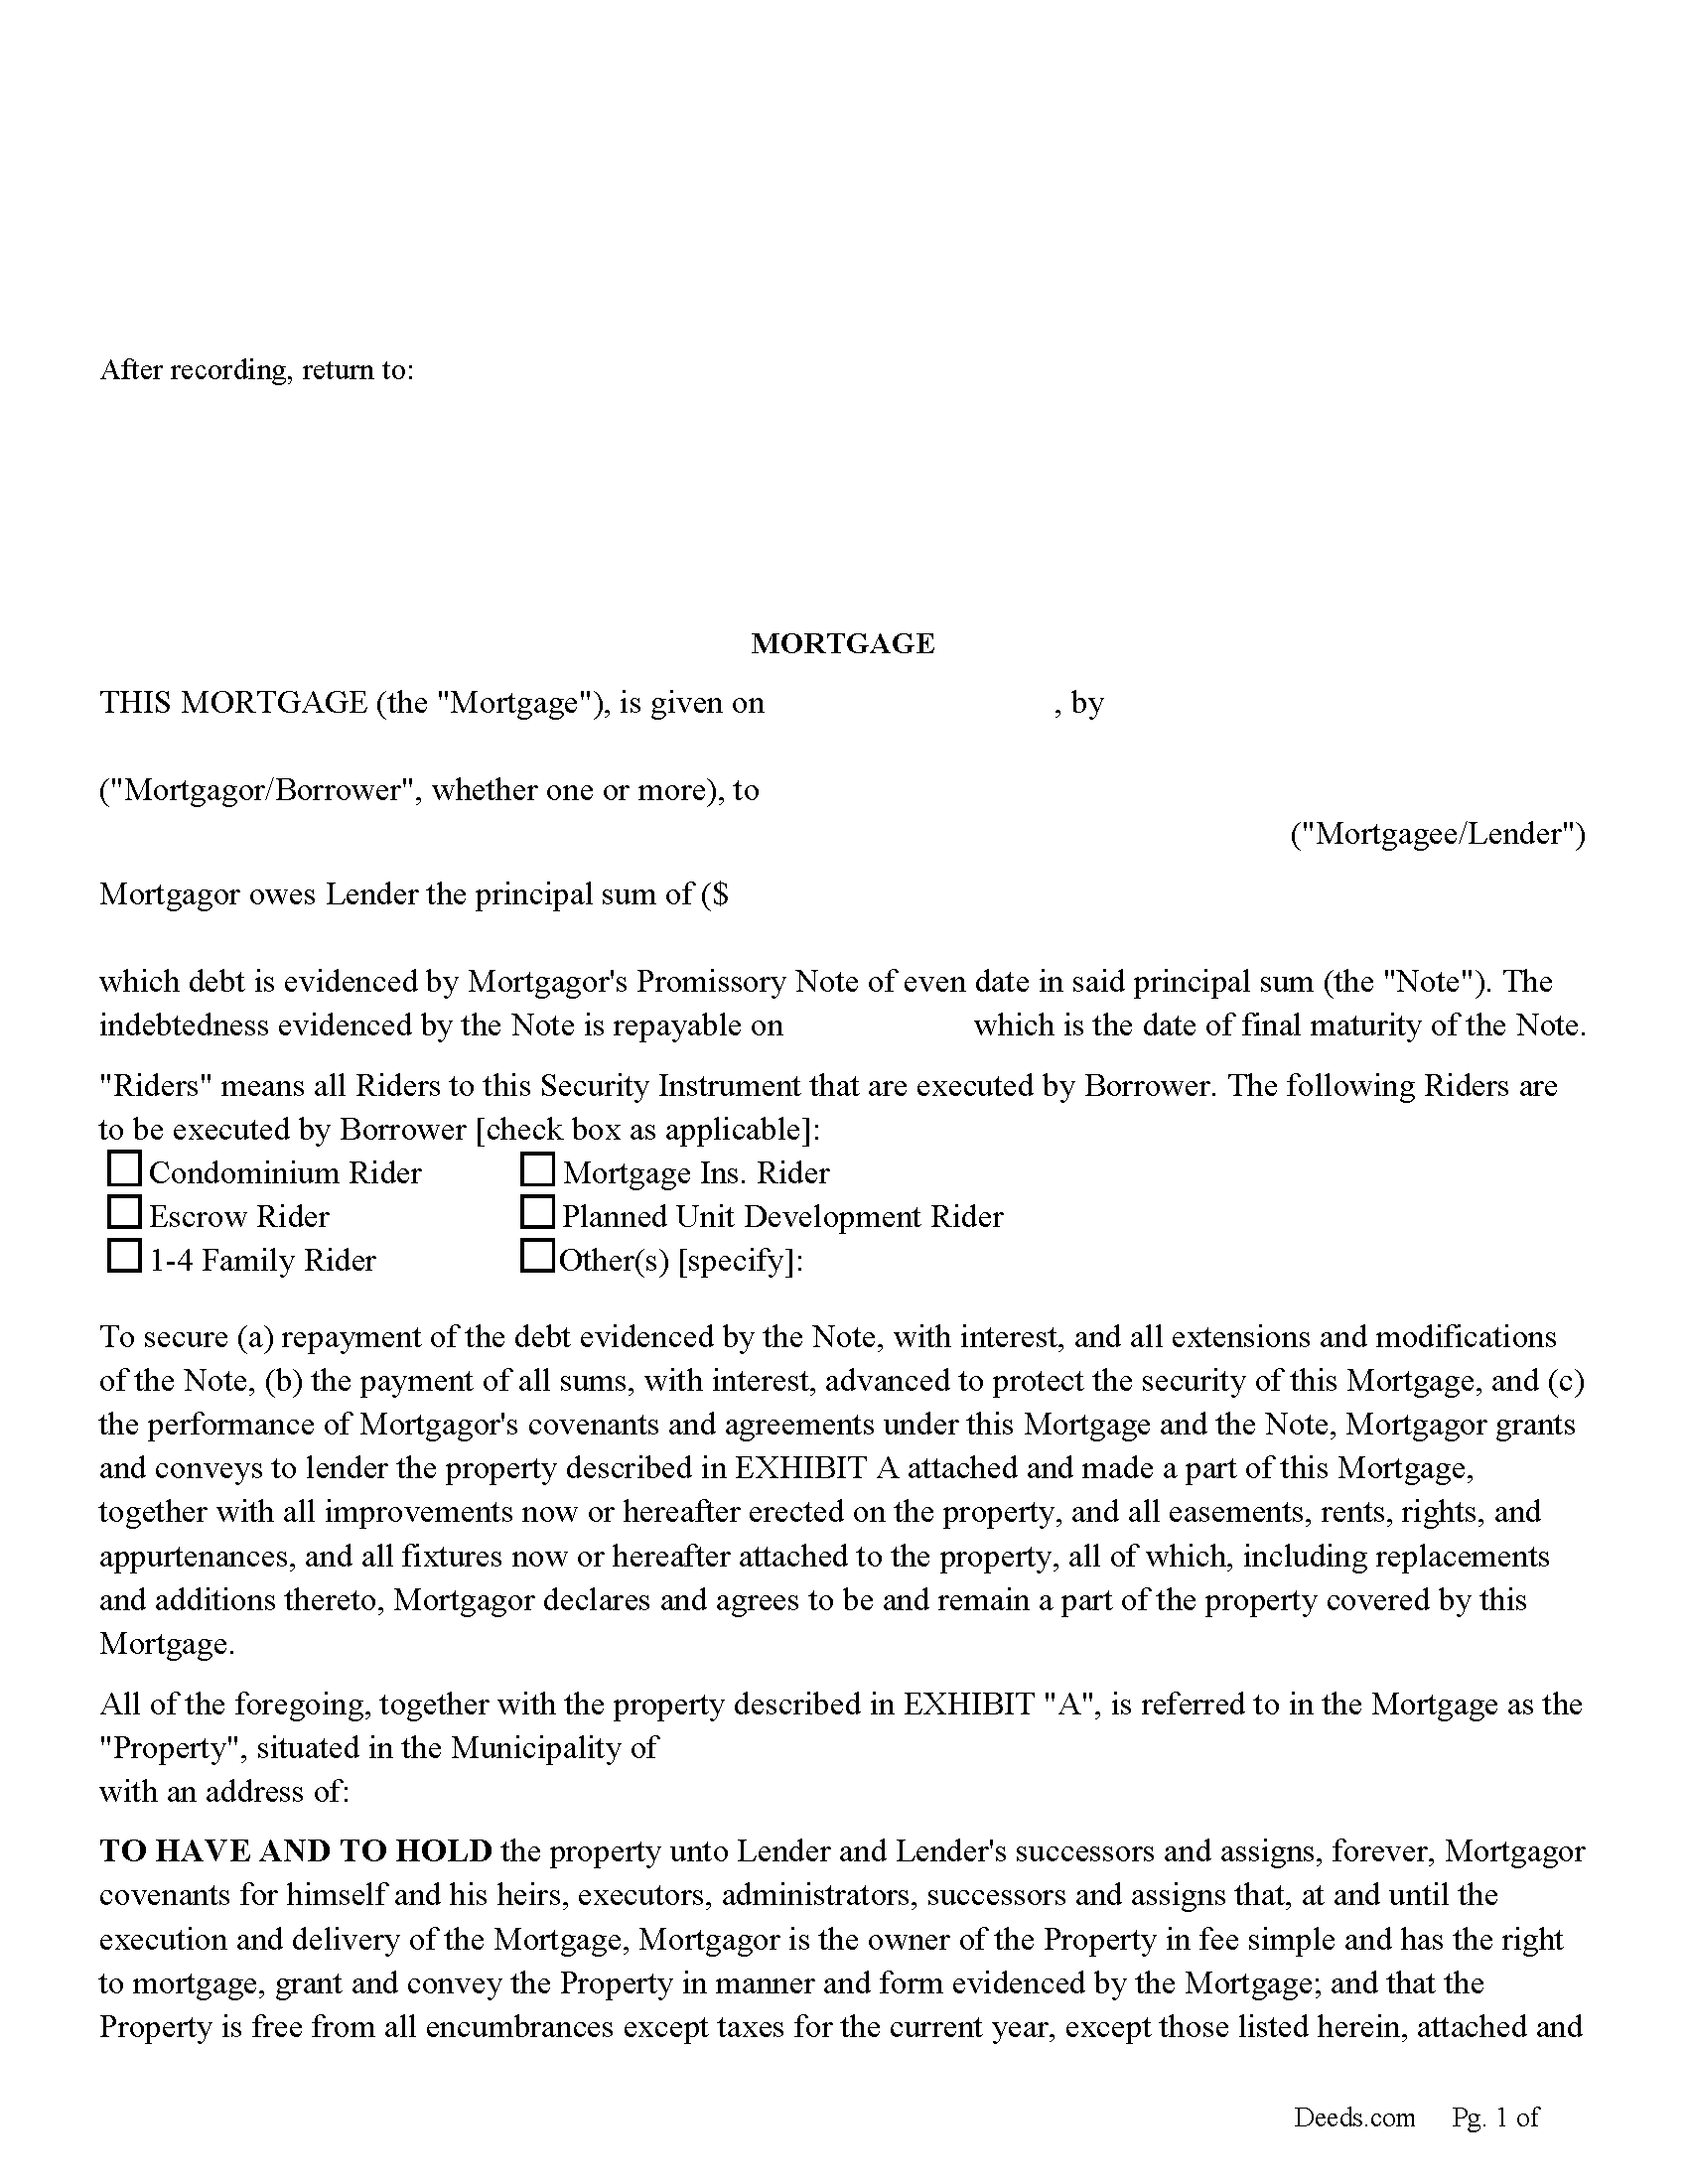 Wisconsin Mortgage and Promissory Note Image